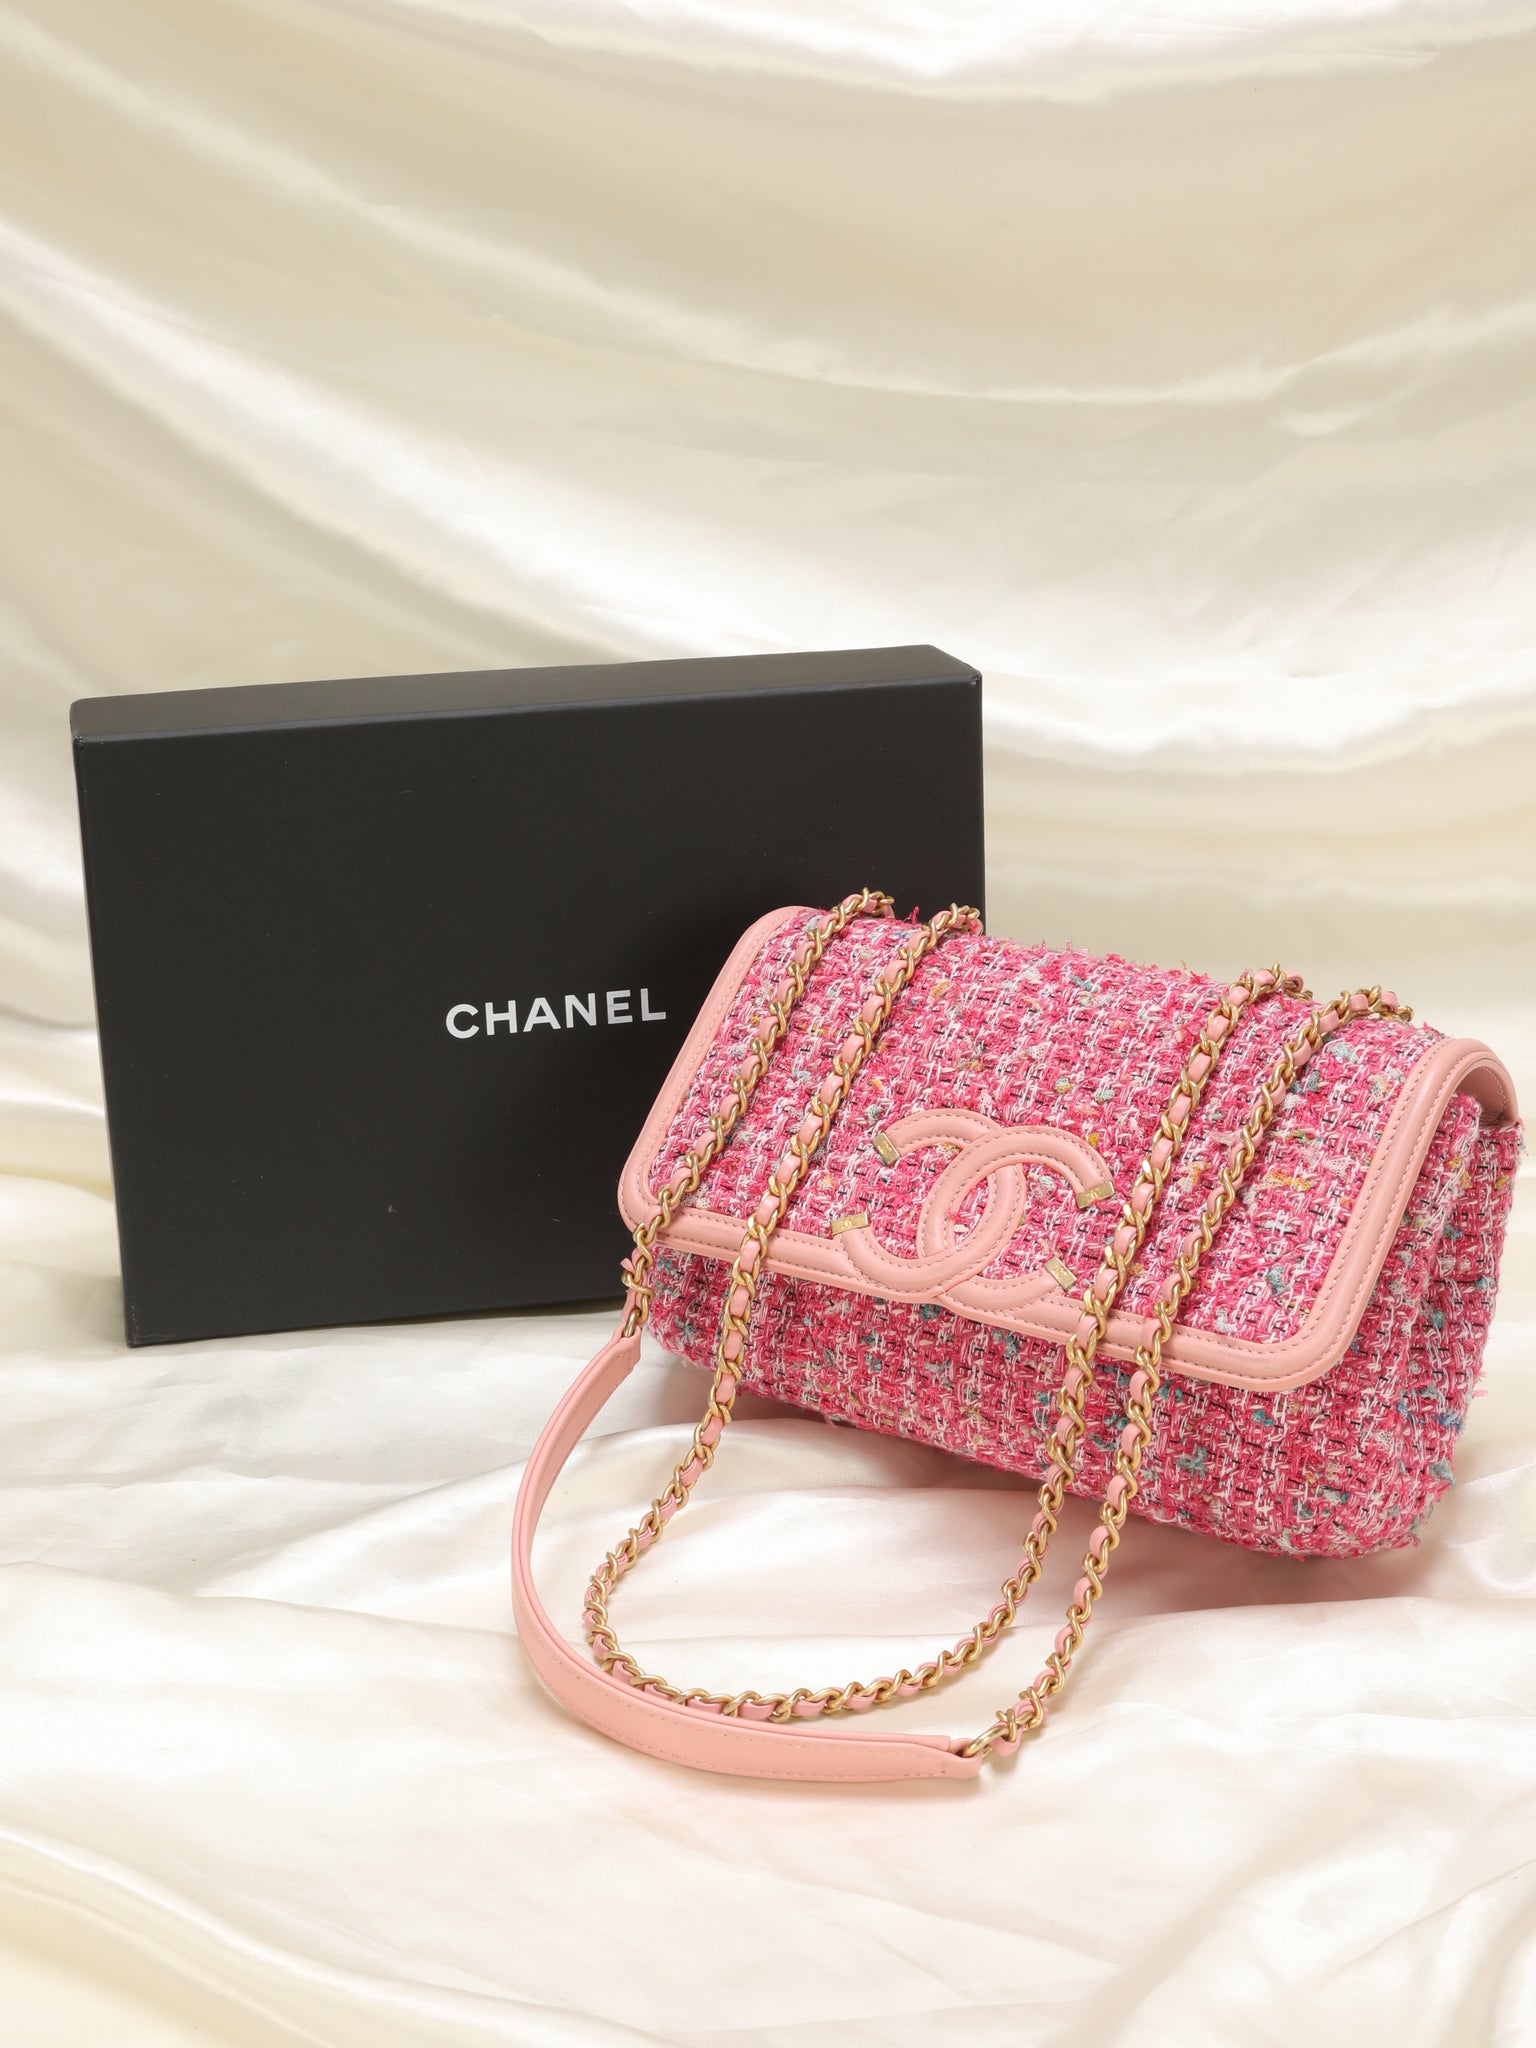 FREE Shipping Over $15Chanel Croc Charms , chanel jibbitz